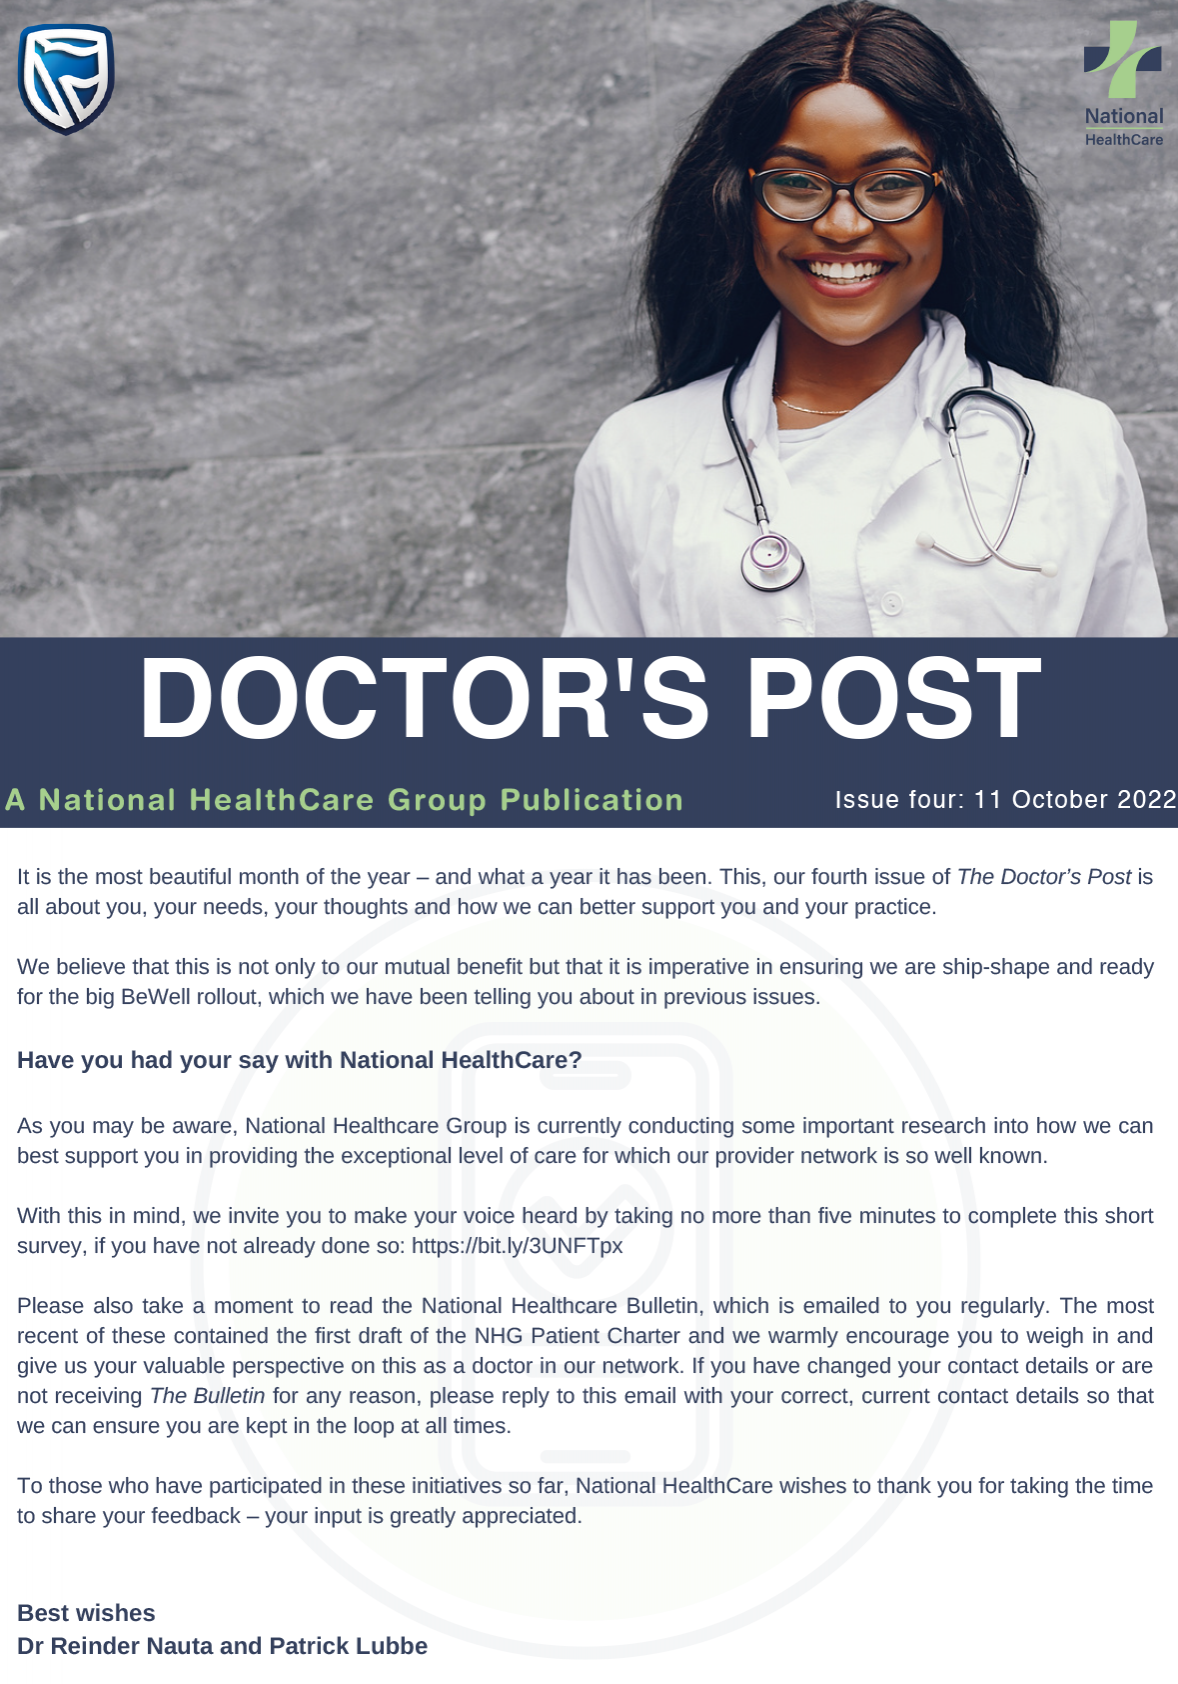 Doctors-Post-Newsletter-Issue-4-feature-image